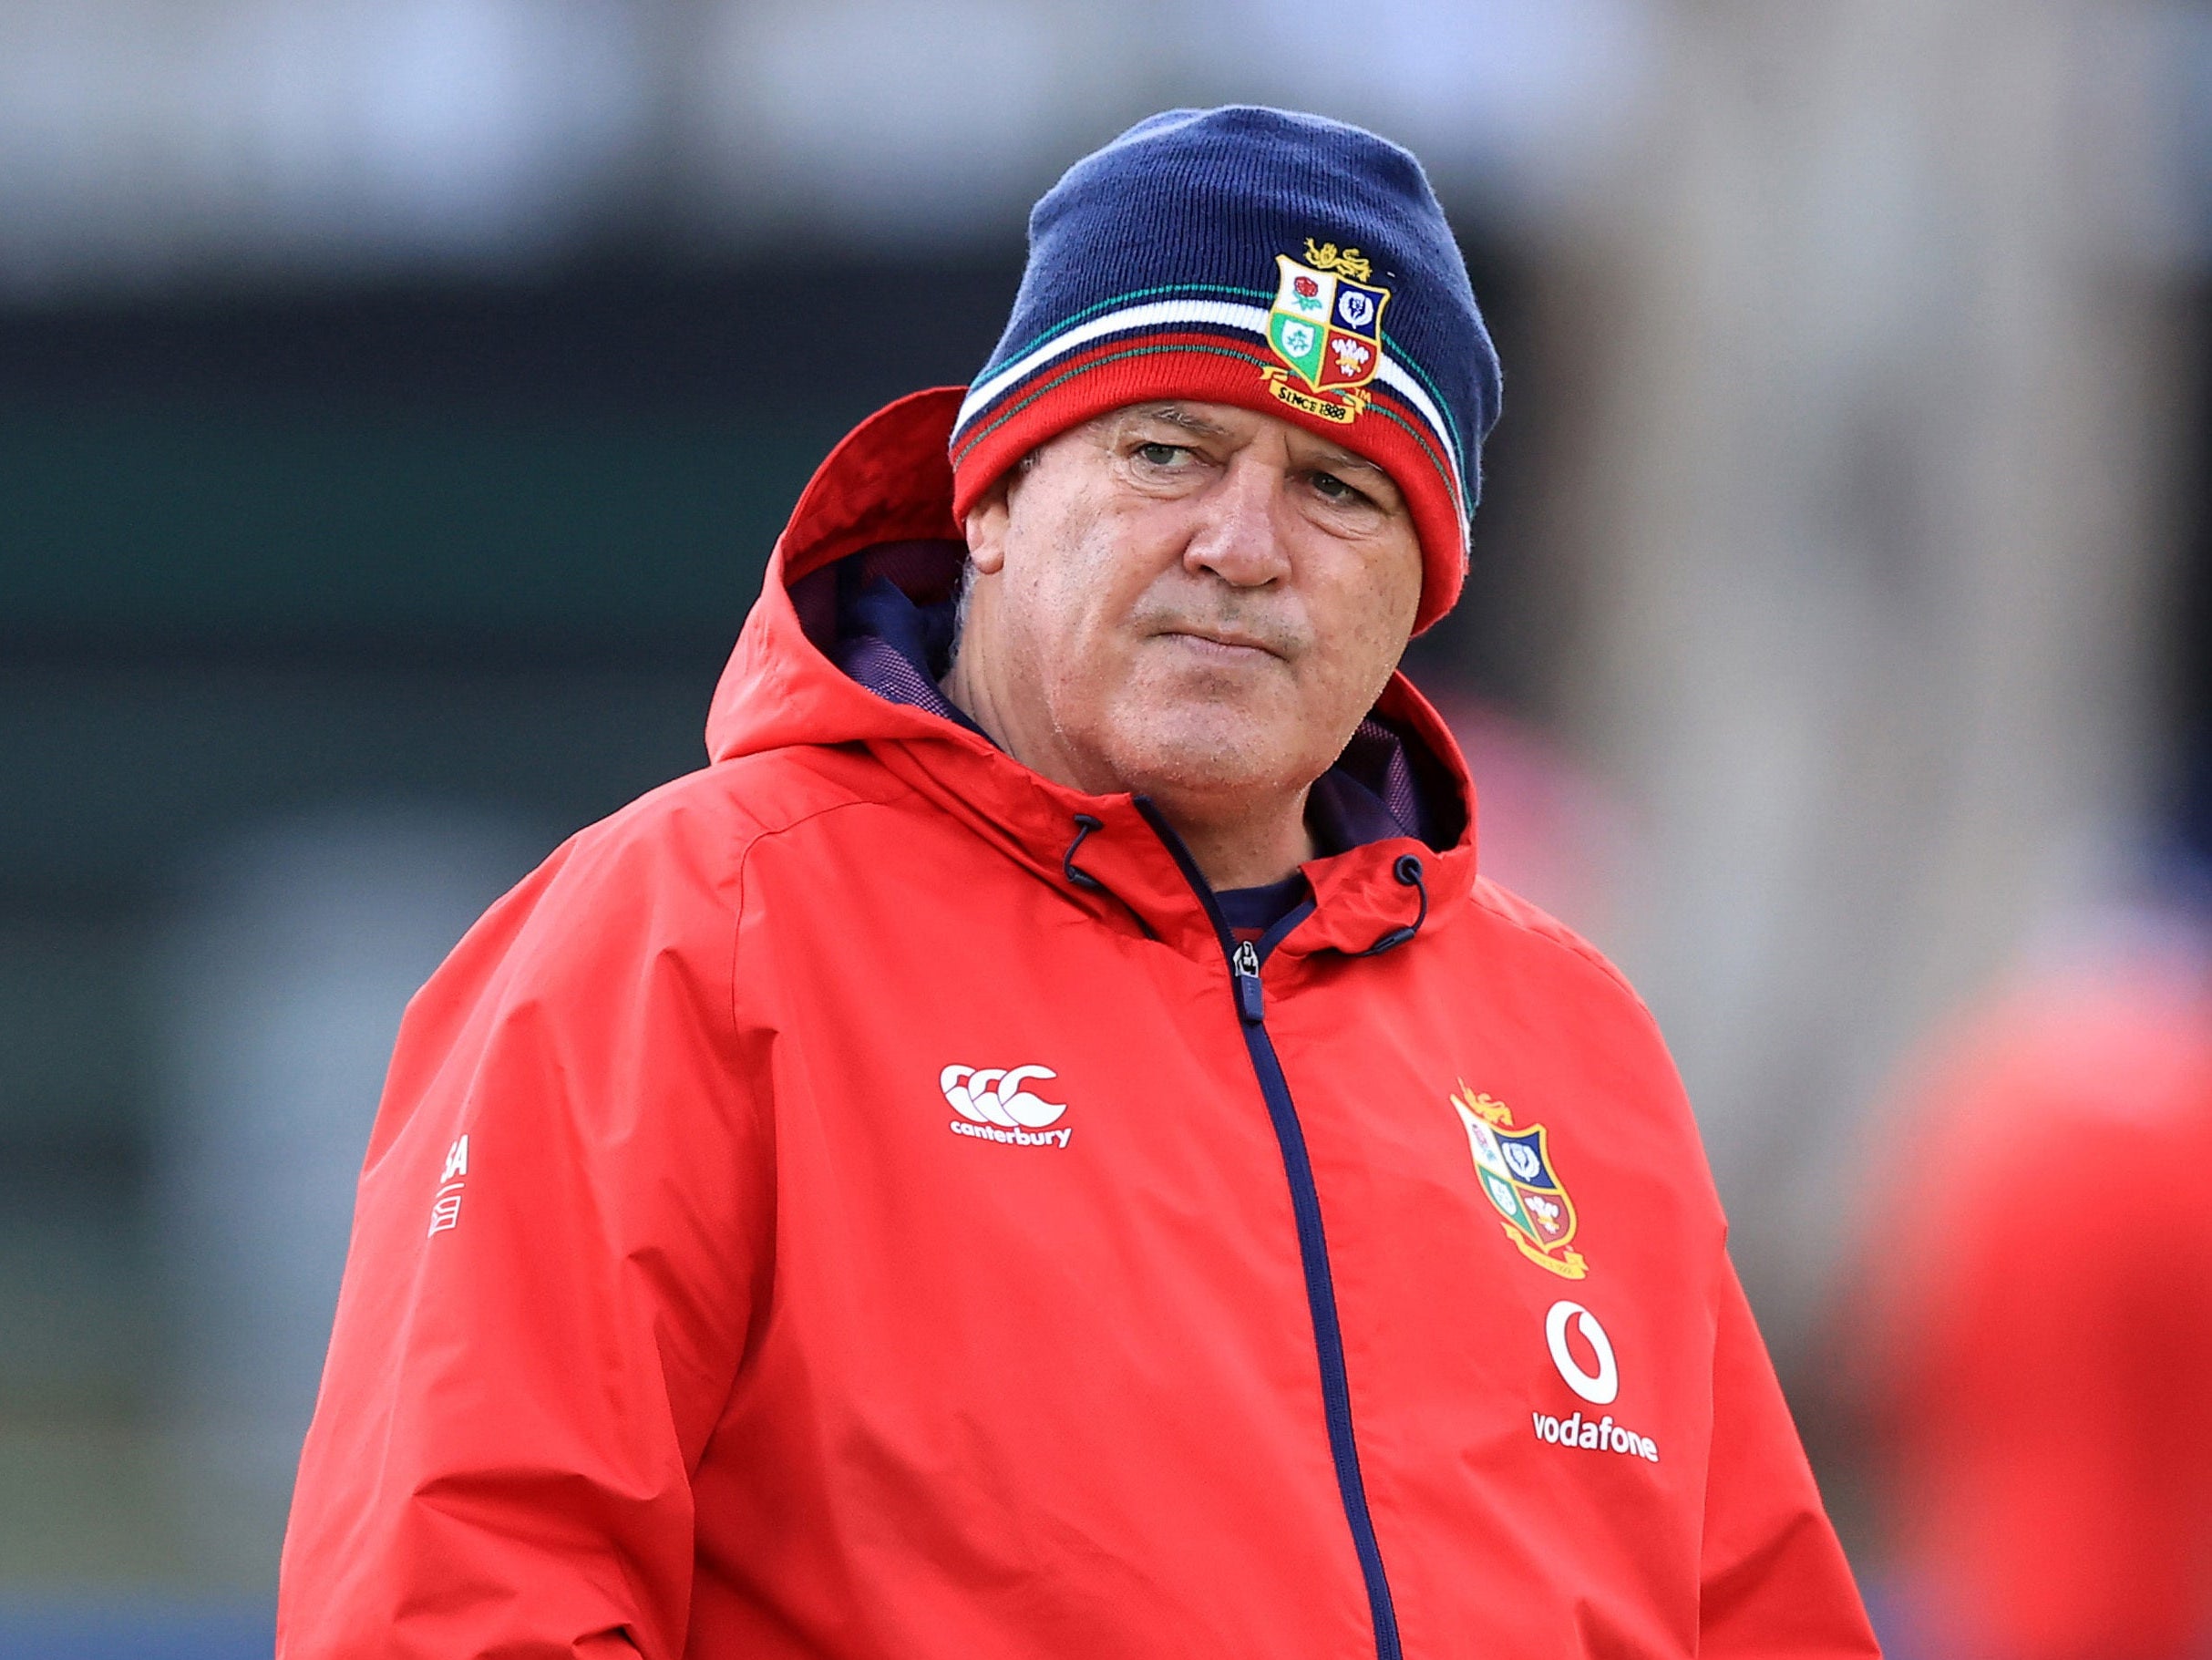 Lions boss Warren Gatland has some tough calls to make in selection for the third Test (PA)